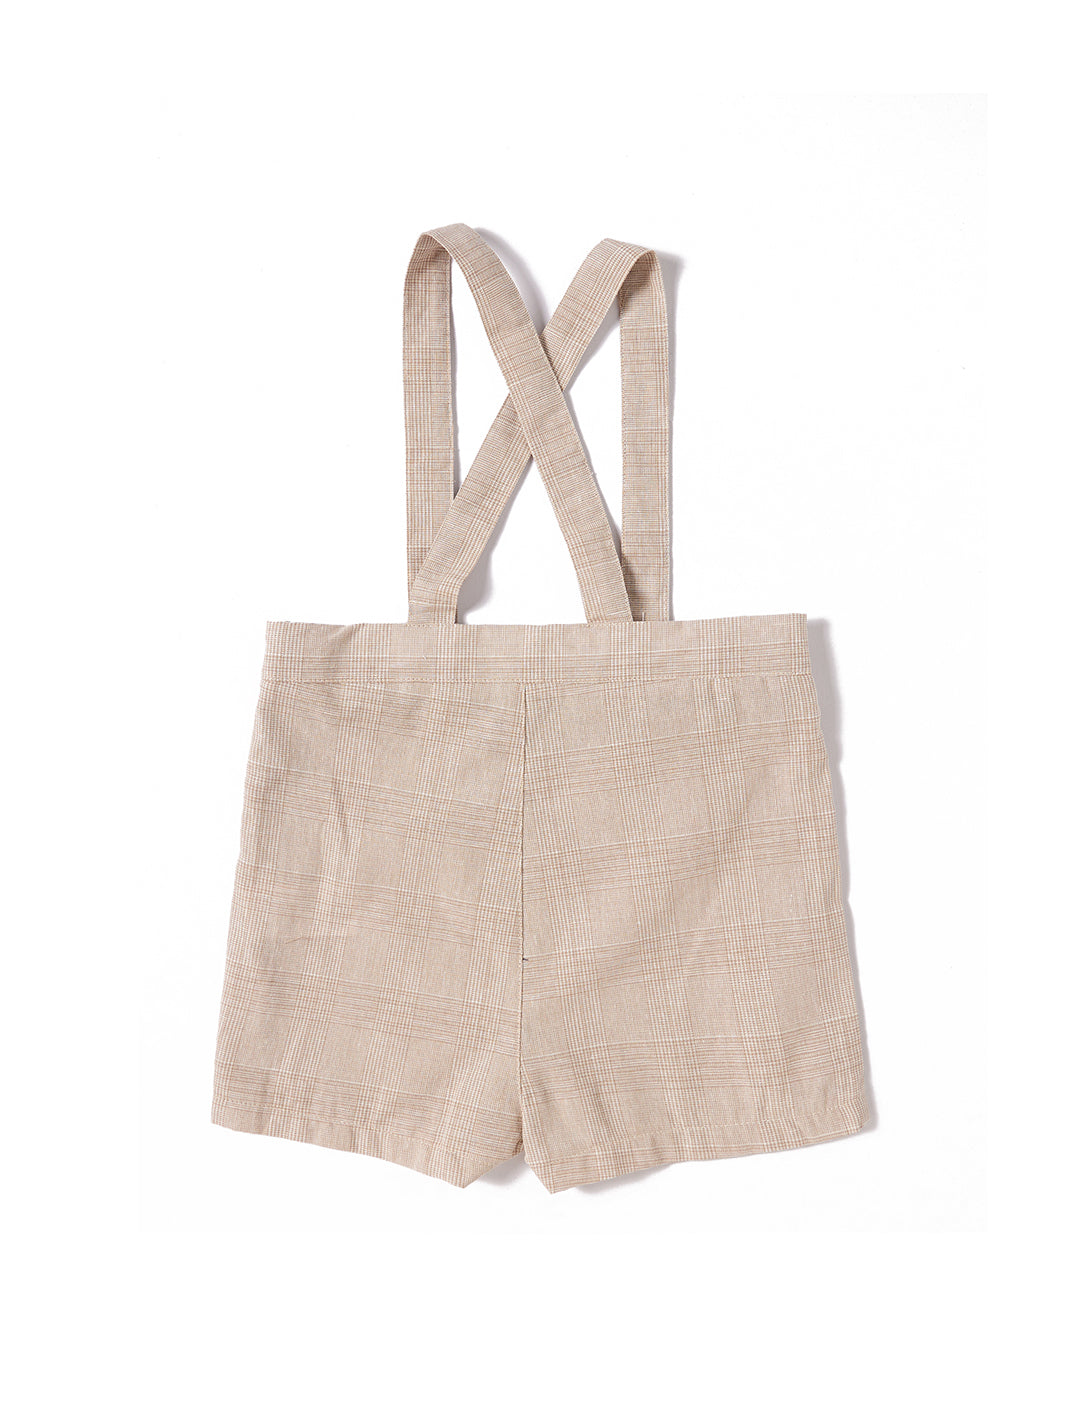 Baby Plaid Overall - Beige/White